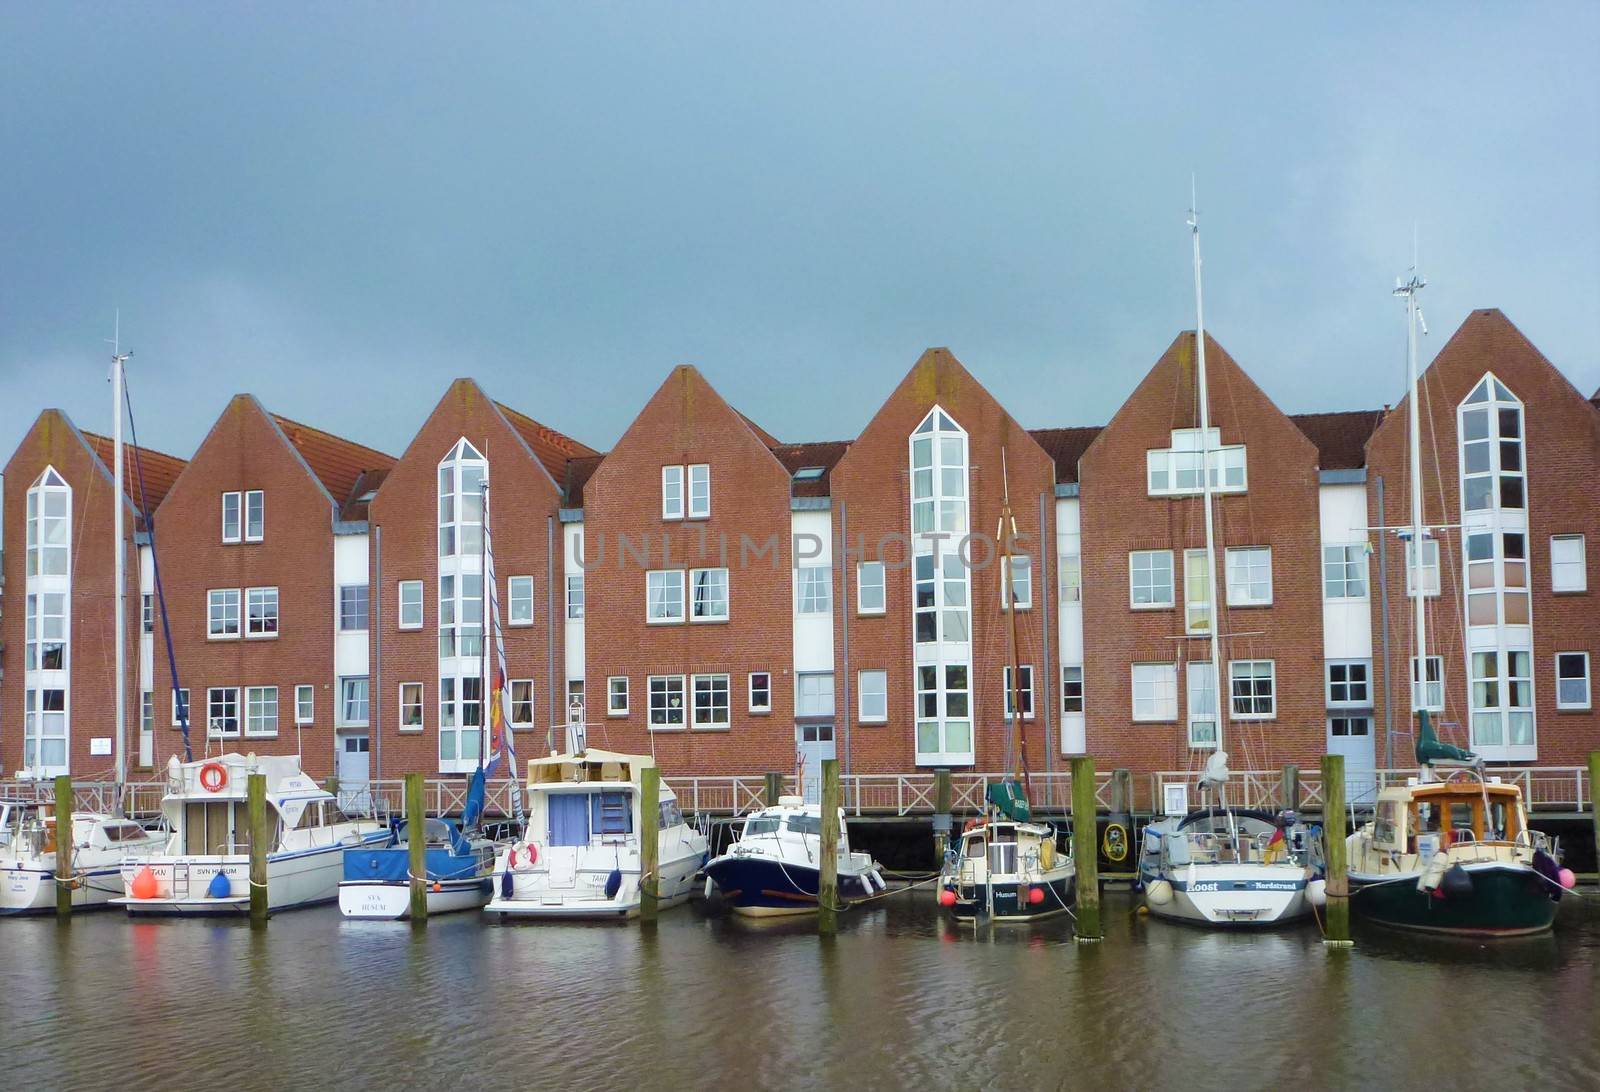 The port of Husum with boats and brick houses